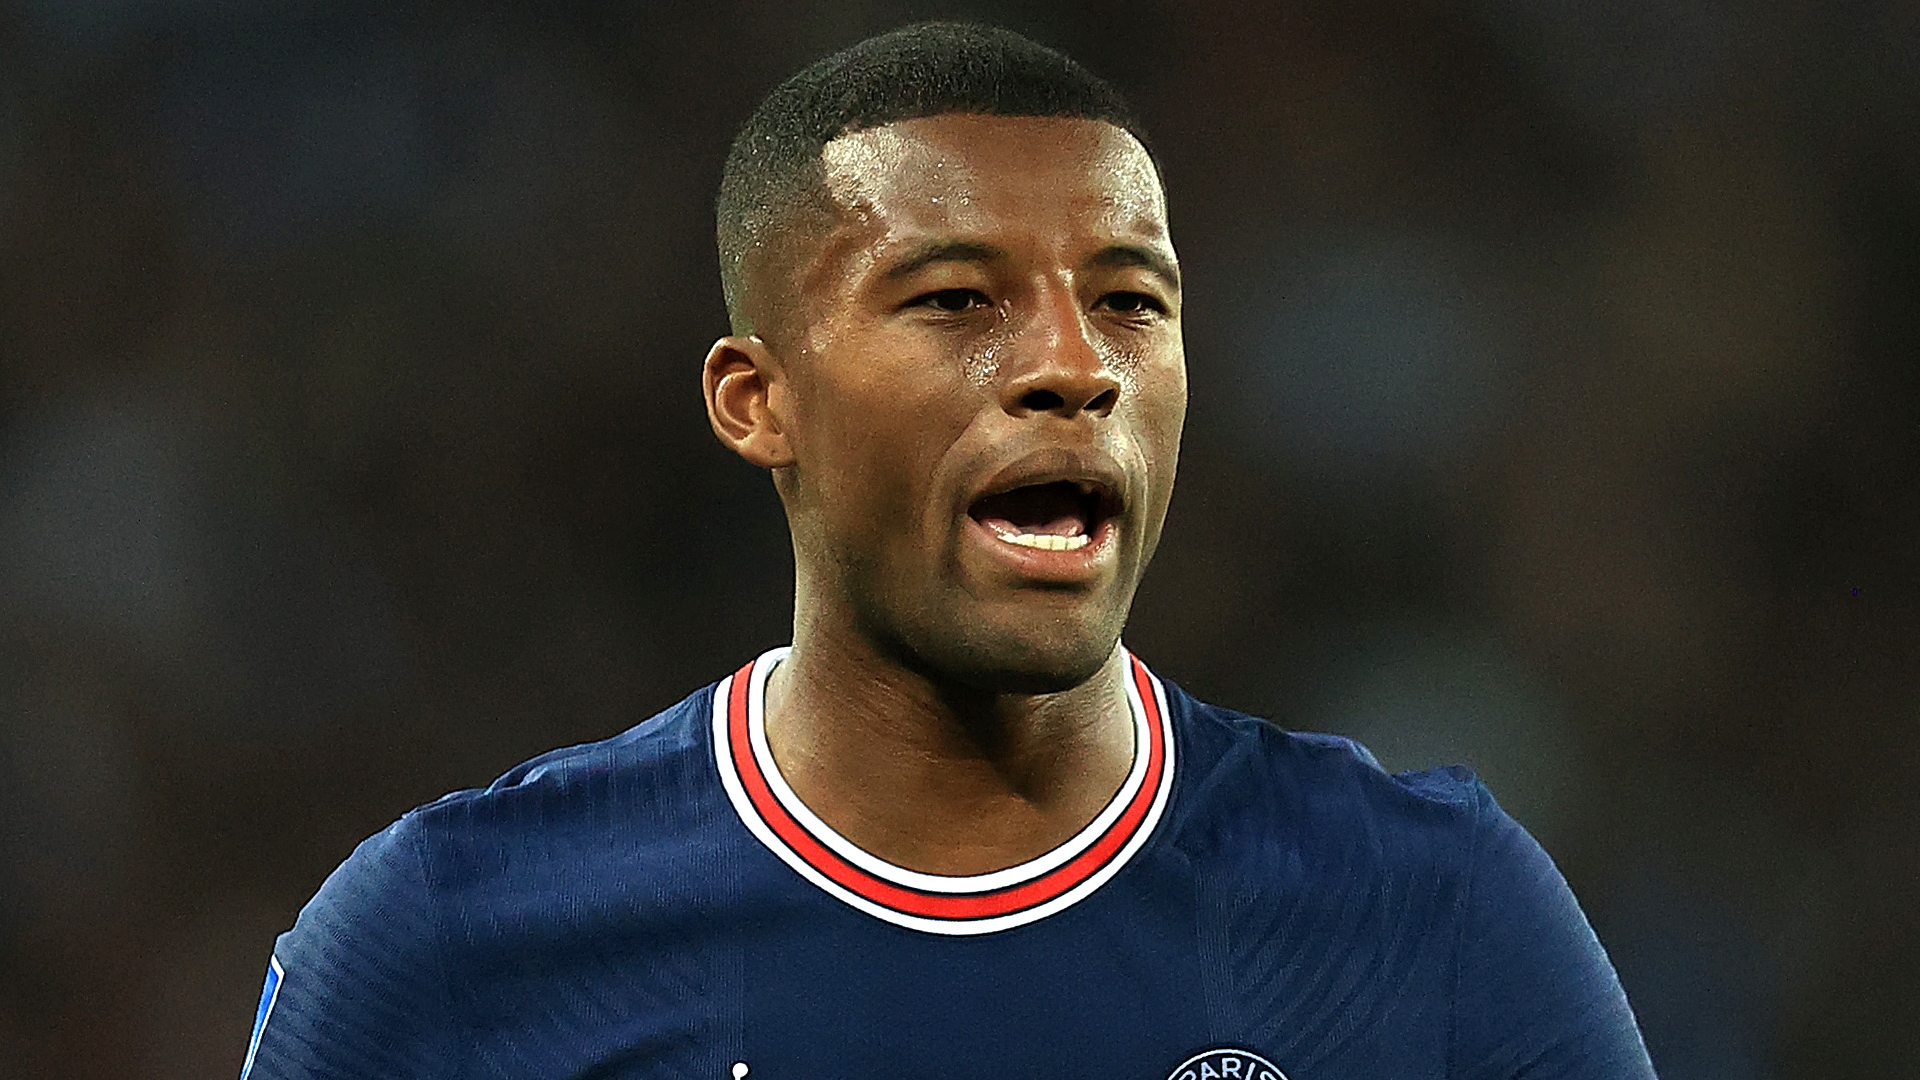 Wijnaldum not 'completely happy' at PSG after 'very difficult' start